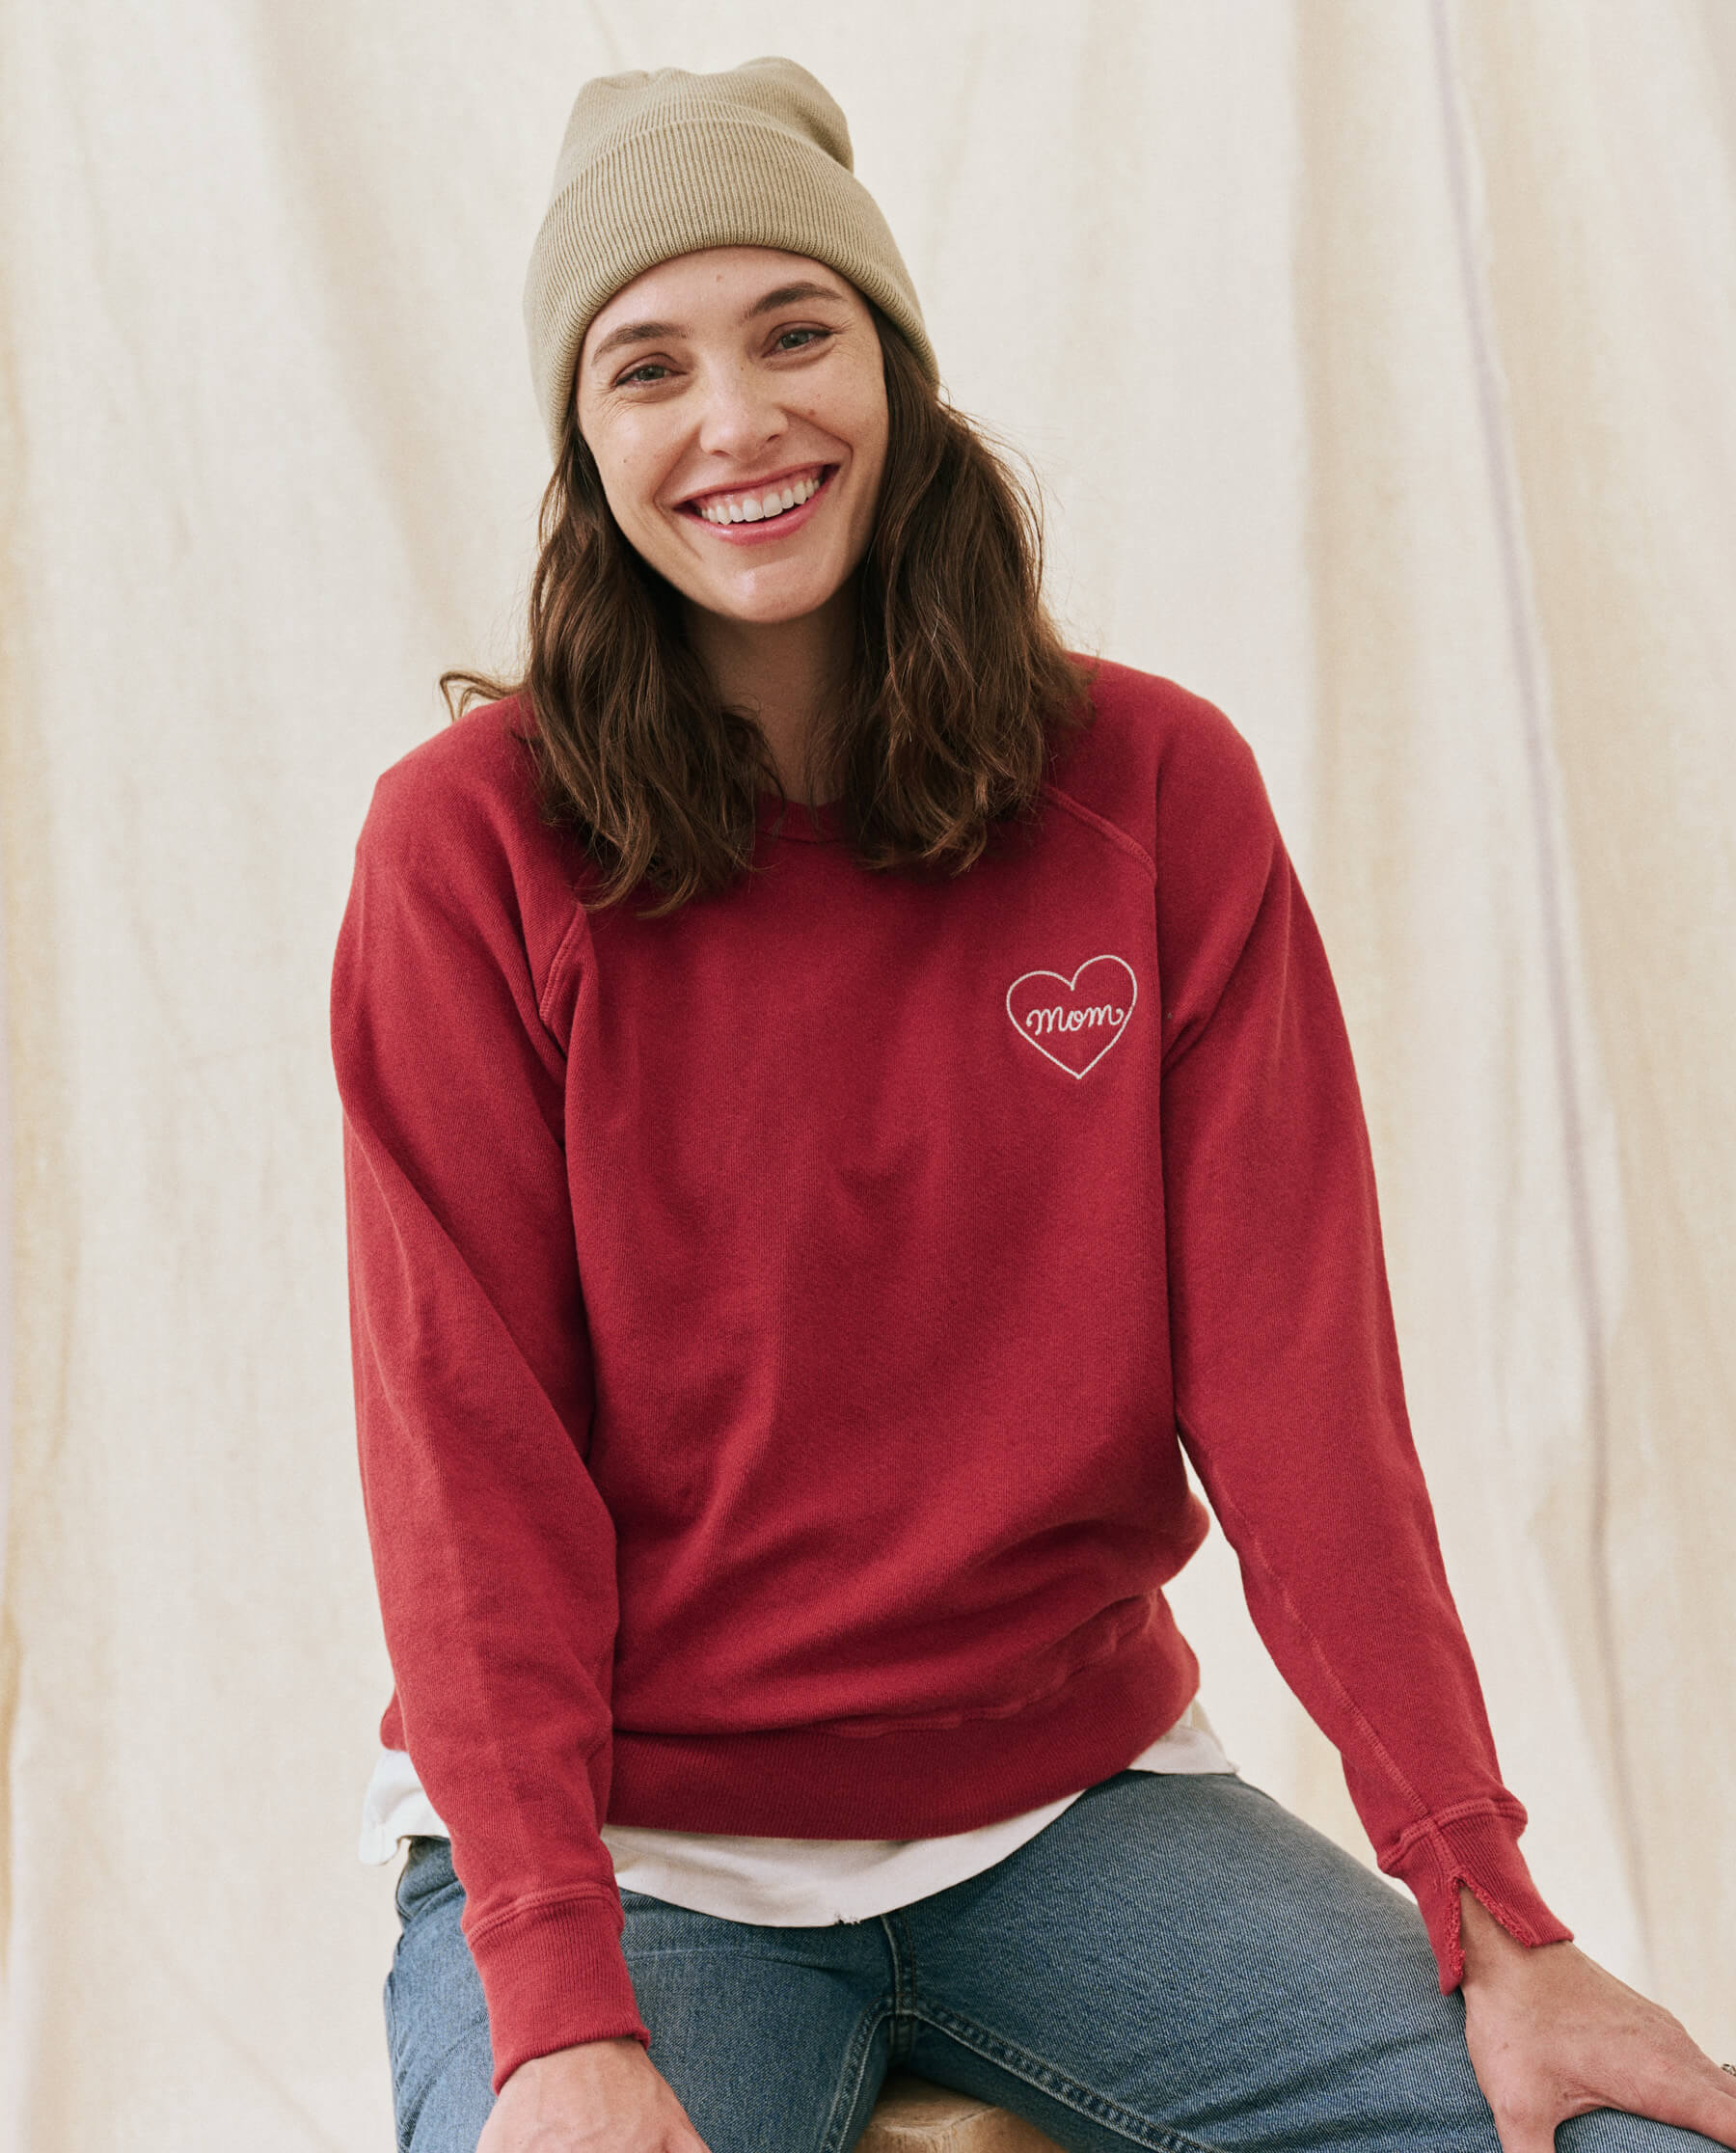 The Mom Embroidered College Sweatshirt. -- Strawberry Tart with Cream SWEATSHIRTS THE GREAT. SP23 MOM